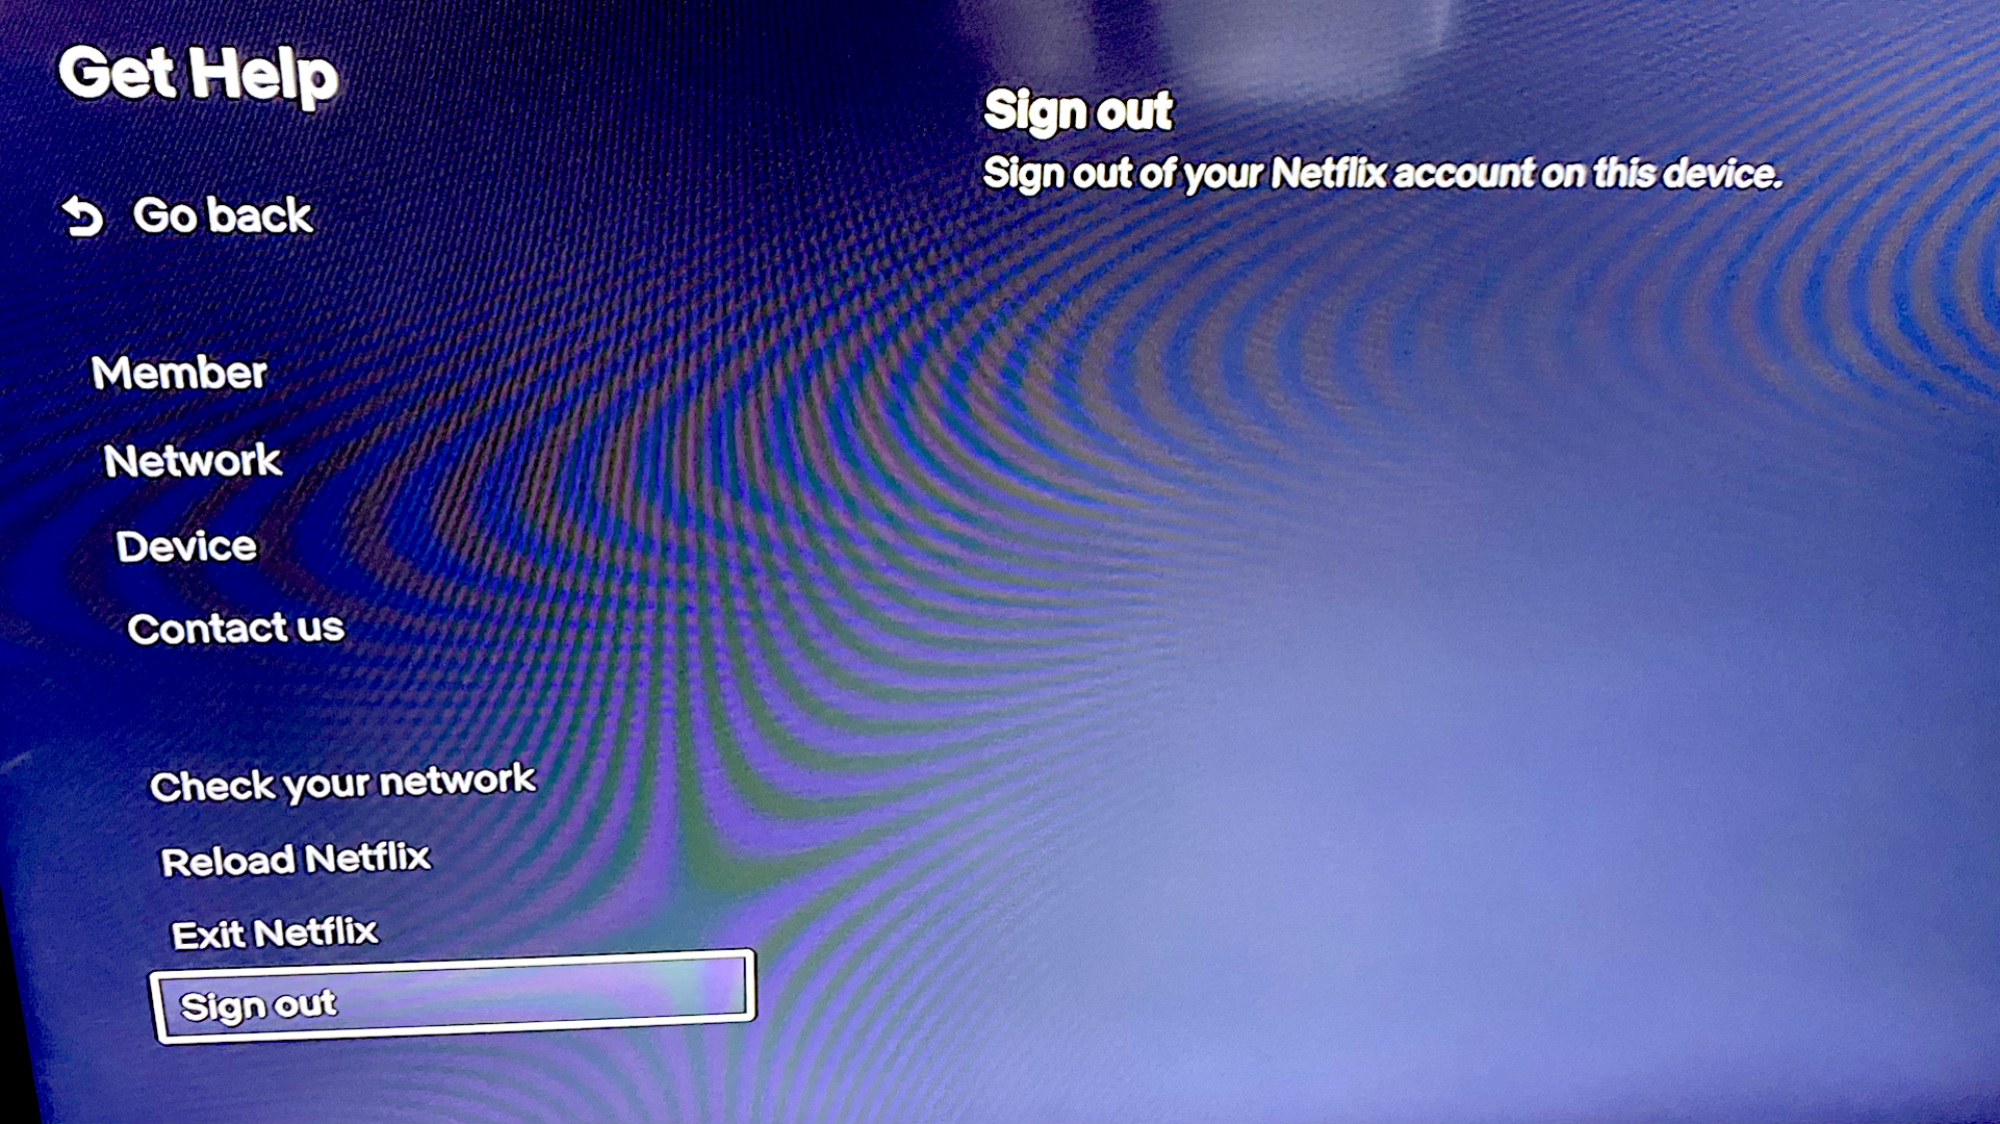 White text on a black background indicating Netflix's "Get Help" menu on a smart TV.